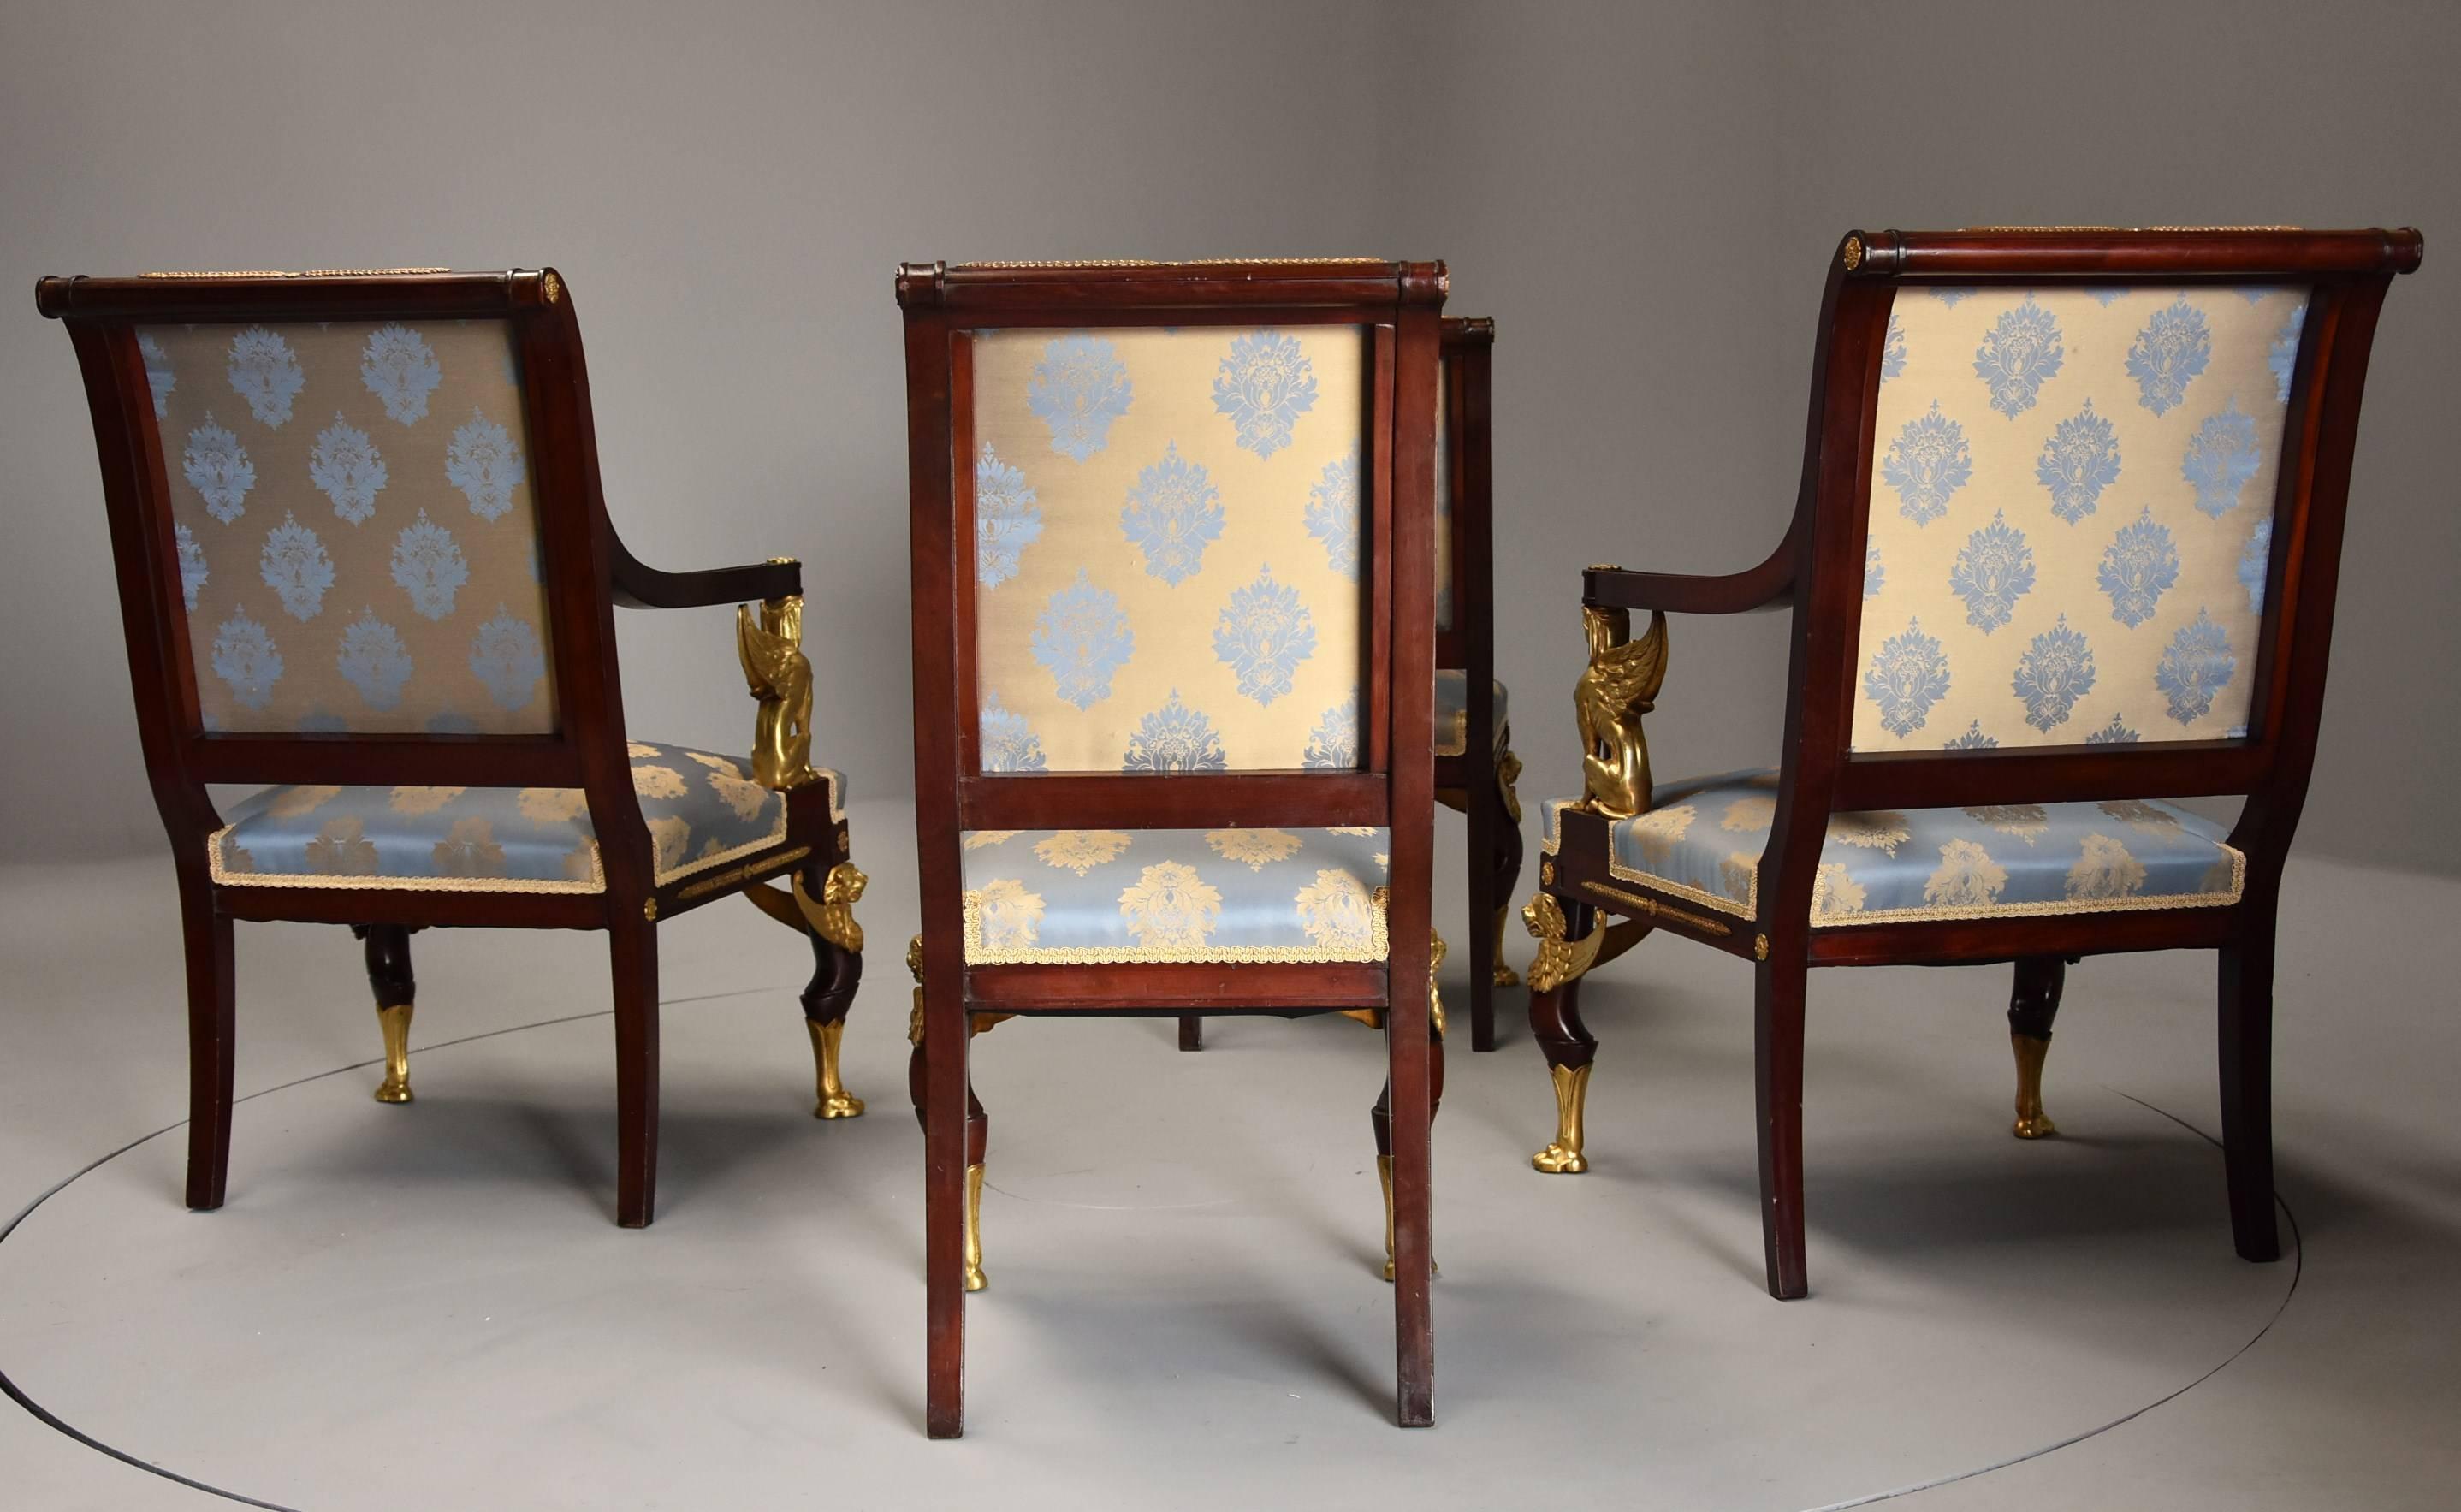 Late 19th Century Set of Four English Mahogany Chairs in the French Empire Style For Sale 6